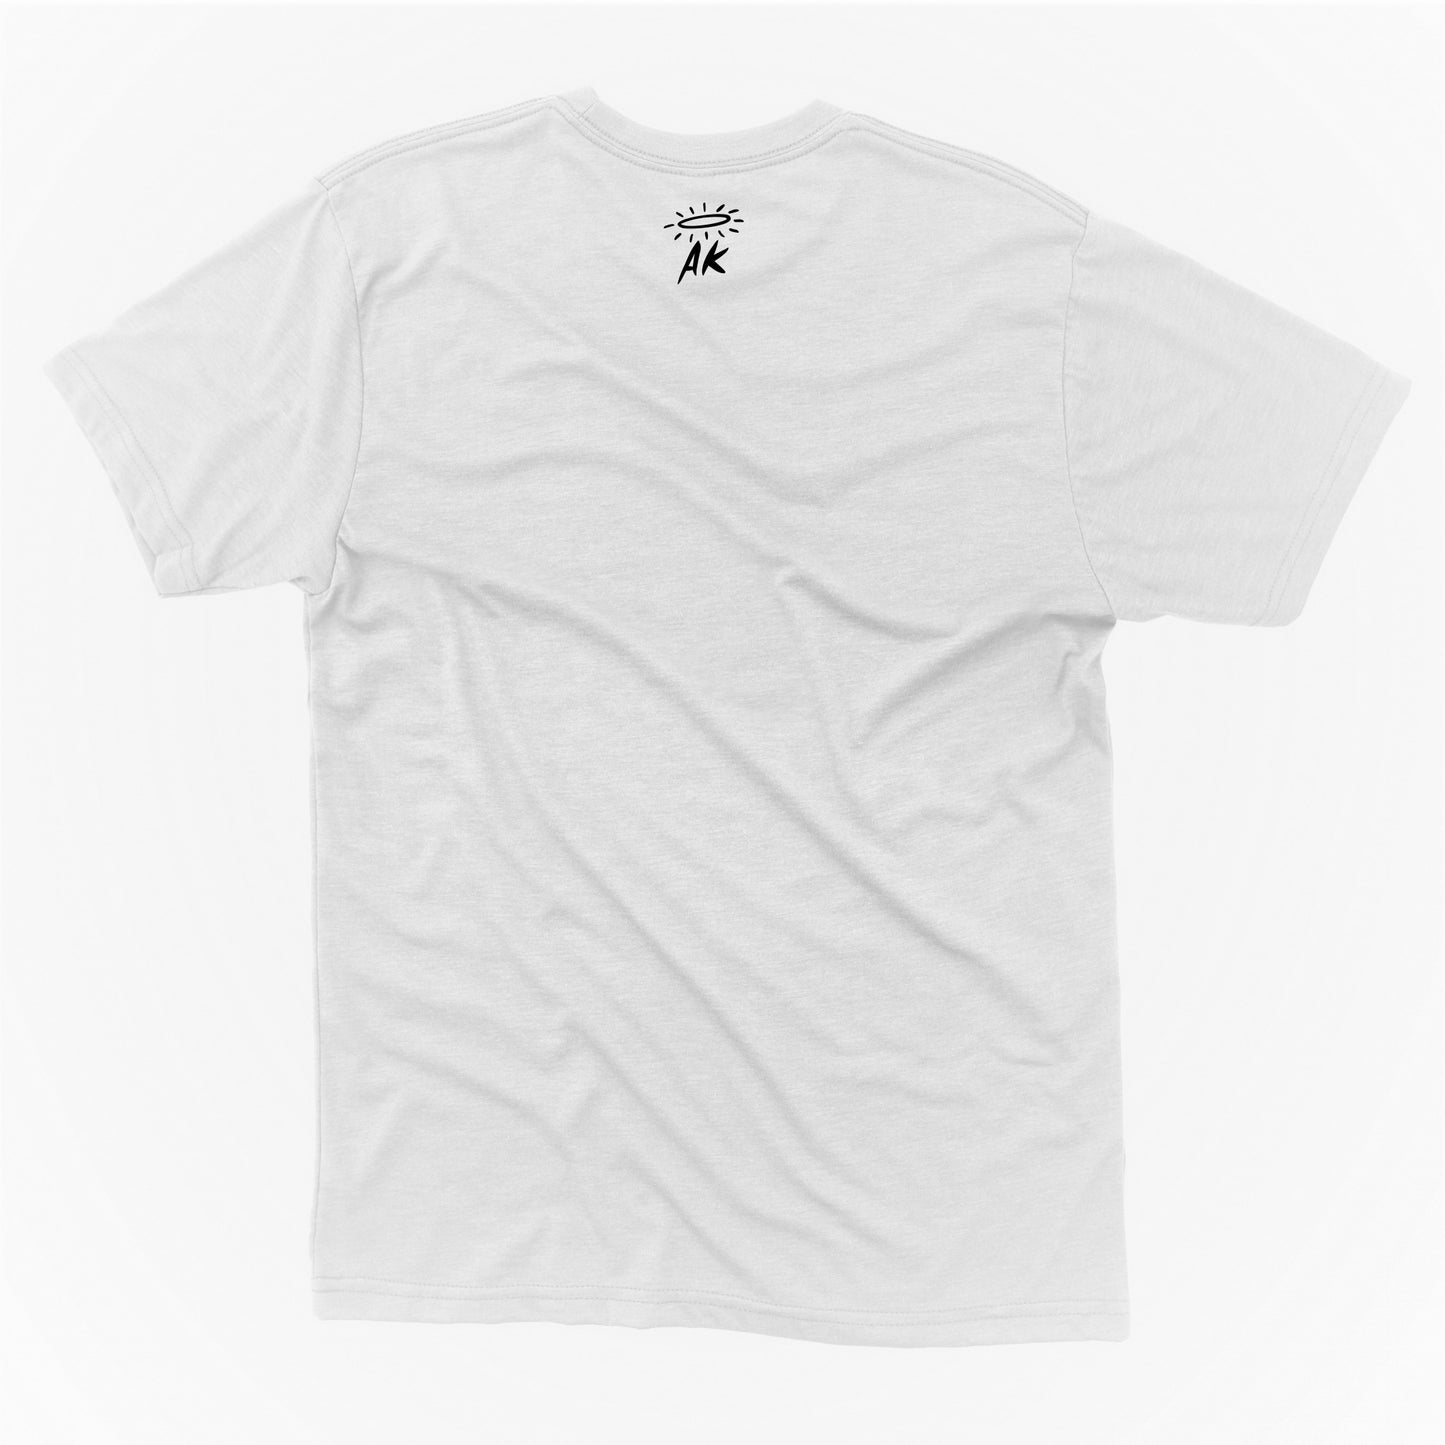 Tracing Patterns Tee